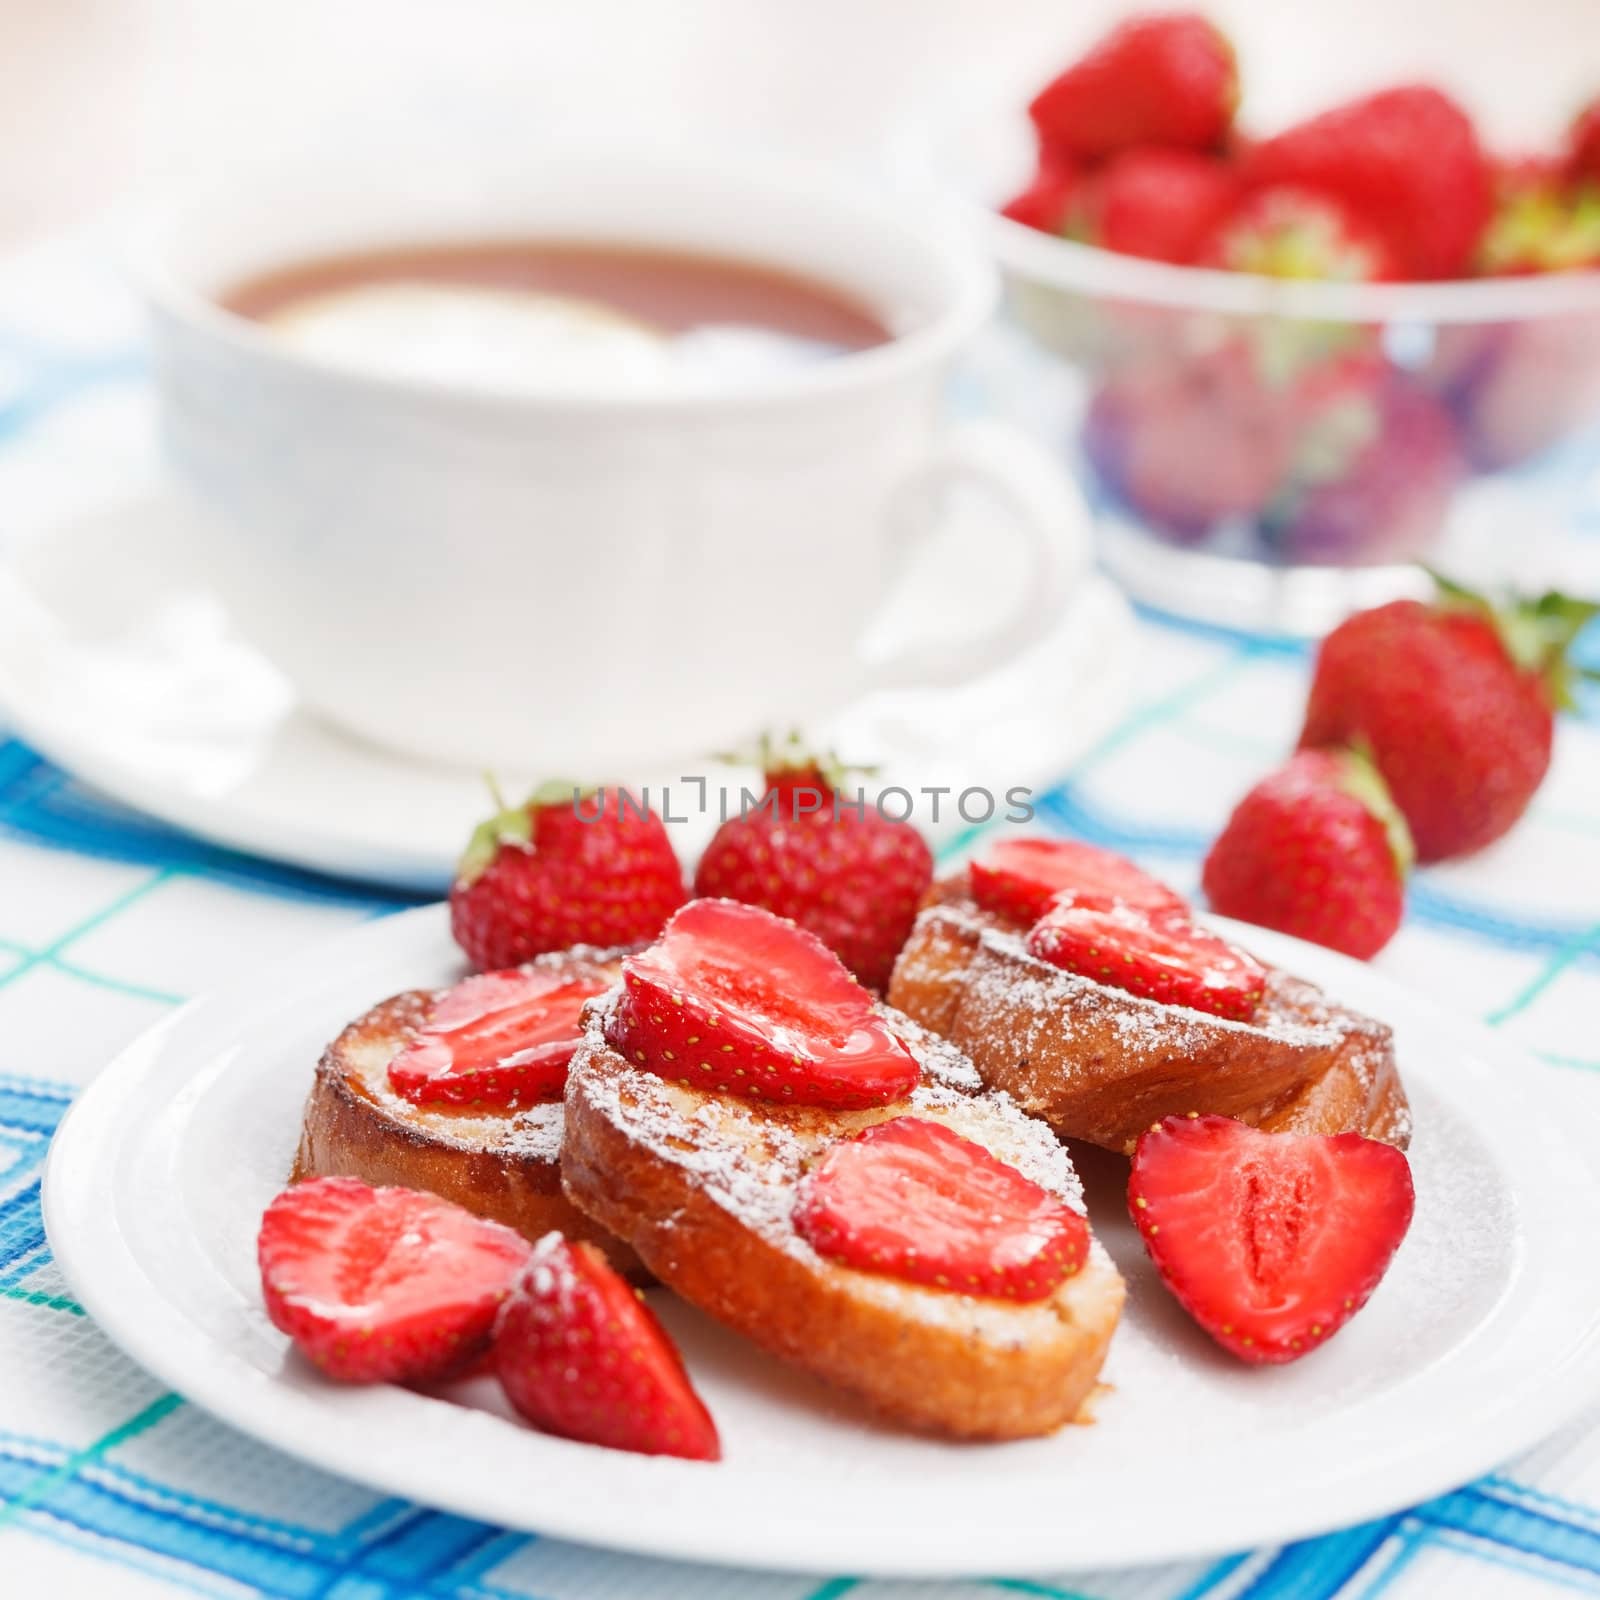 French toasts with powdered sugar and a strawberry